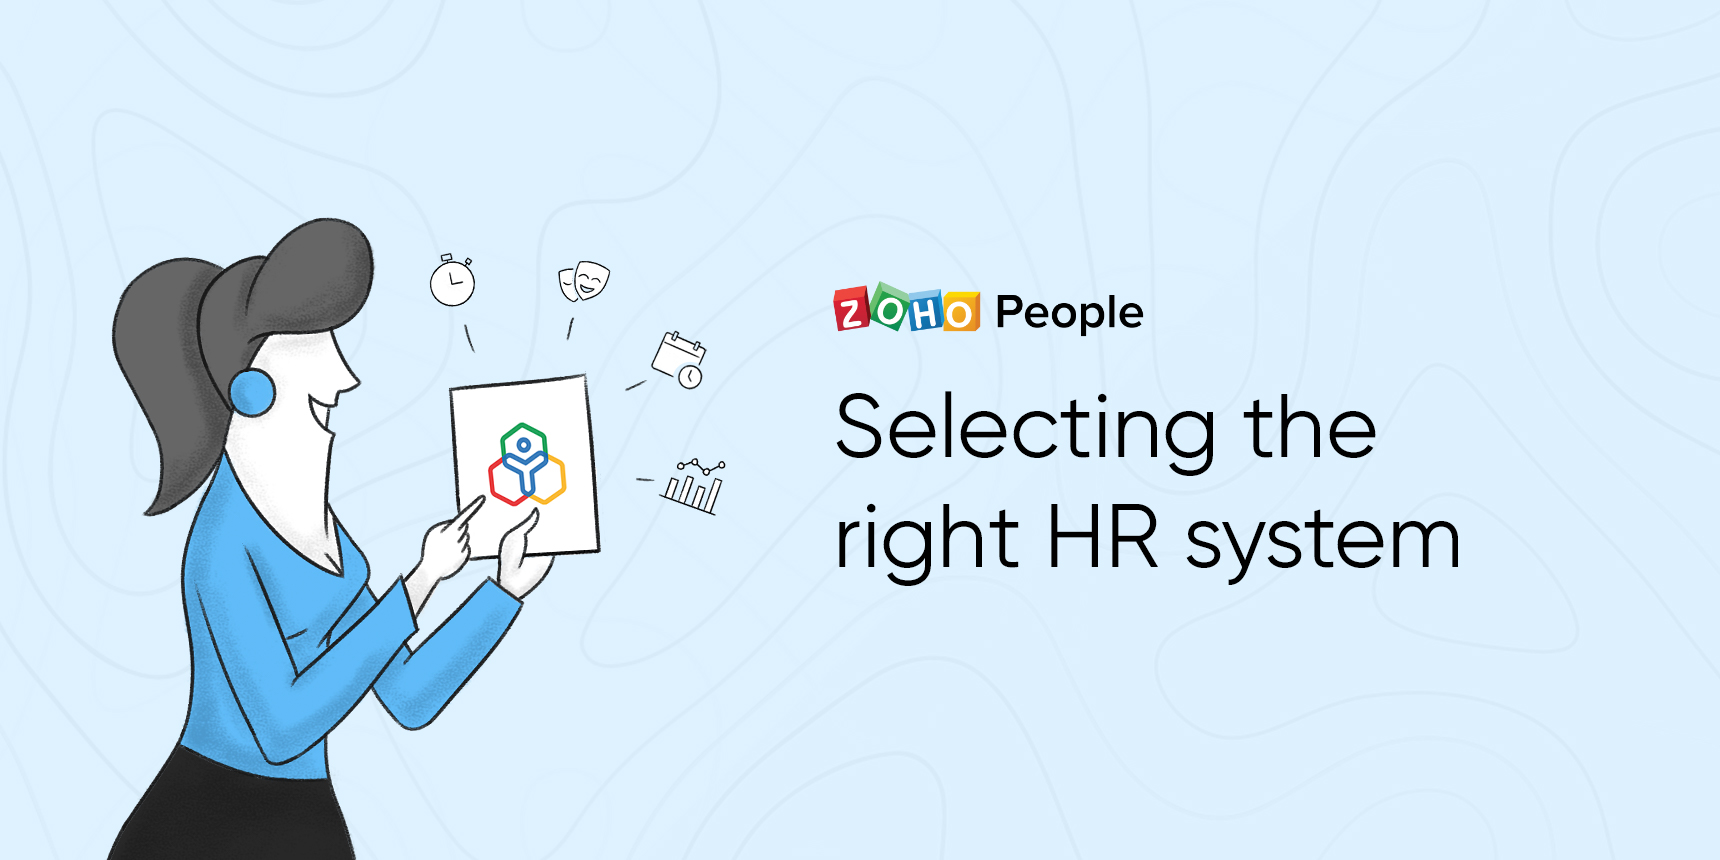 7 steps to choose the right HR system for your organization